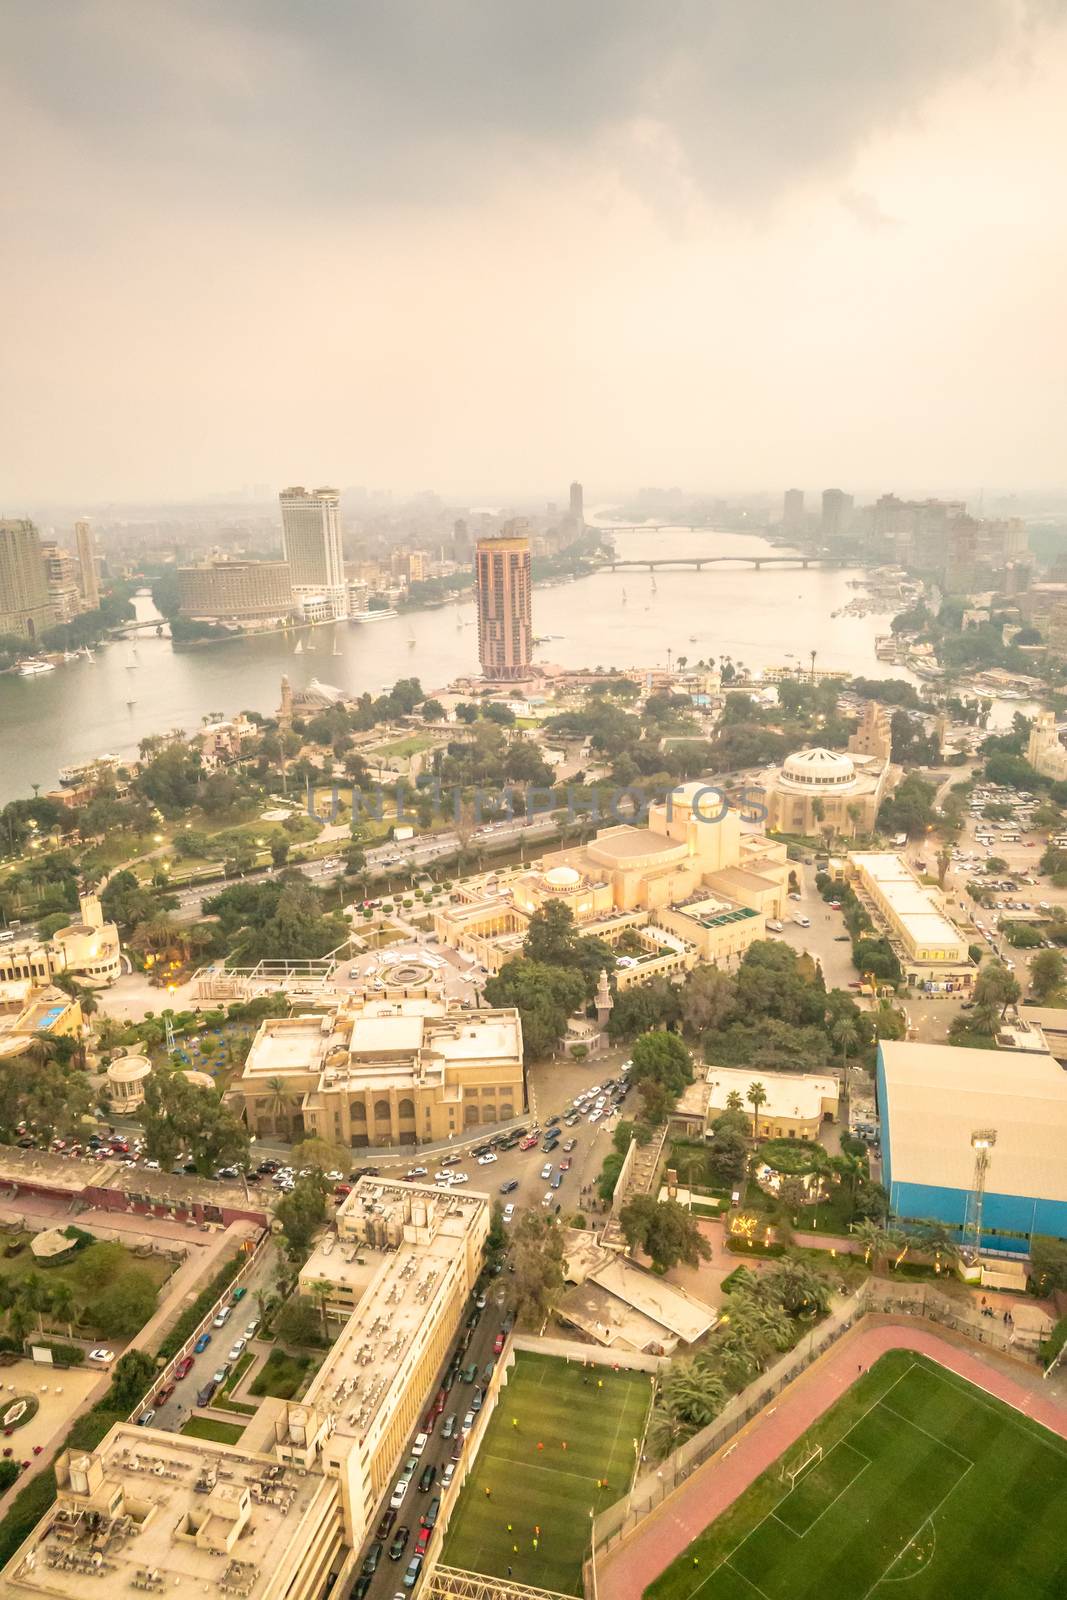 Nile in Cairo Egypt by magann